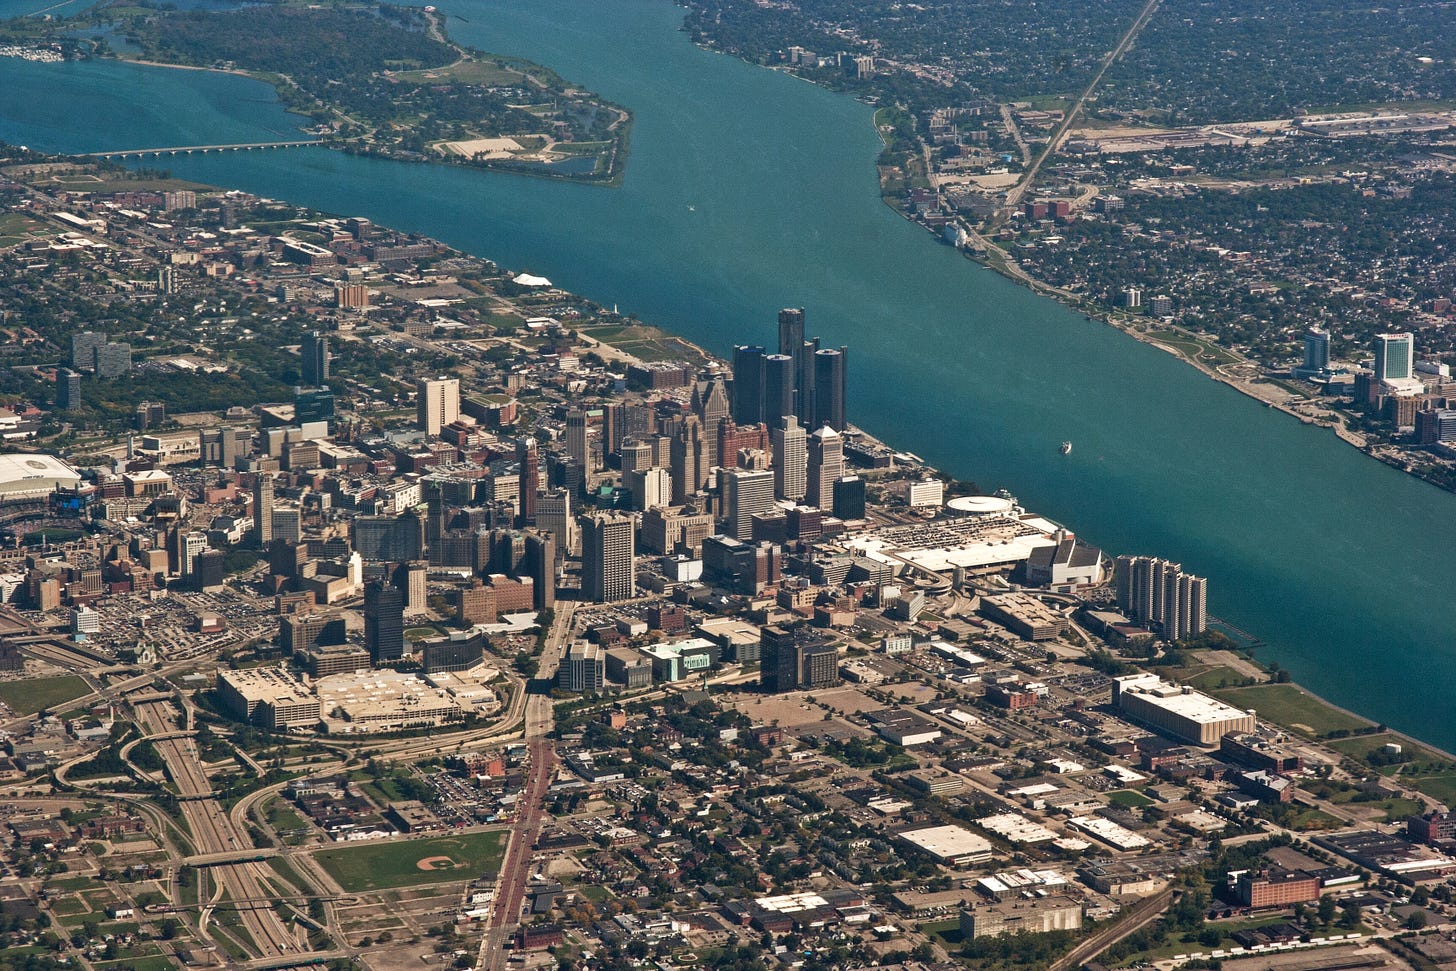 An aerial shot of Detroit, looking northeast to Ontario Canada with Belle Isle visible in the center of the Detroit River